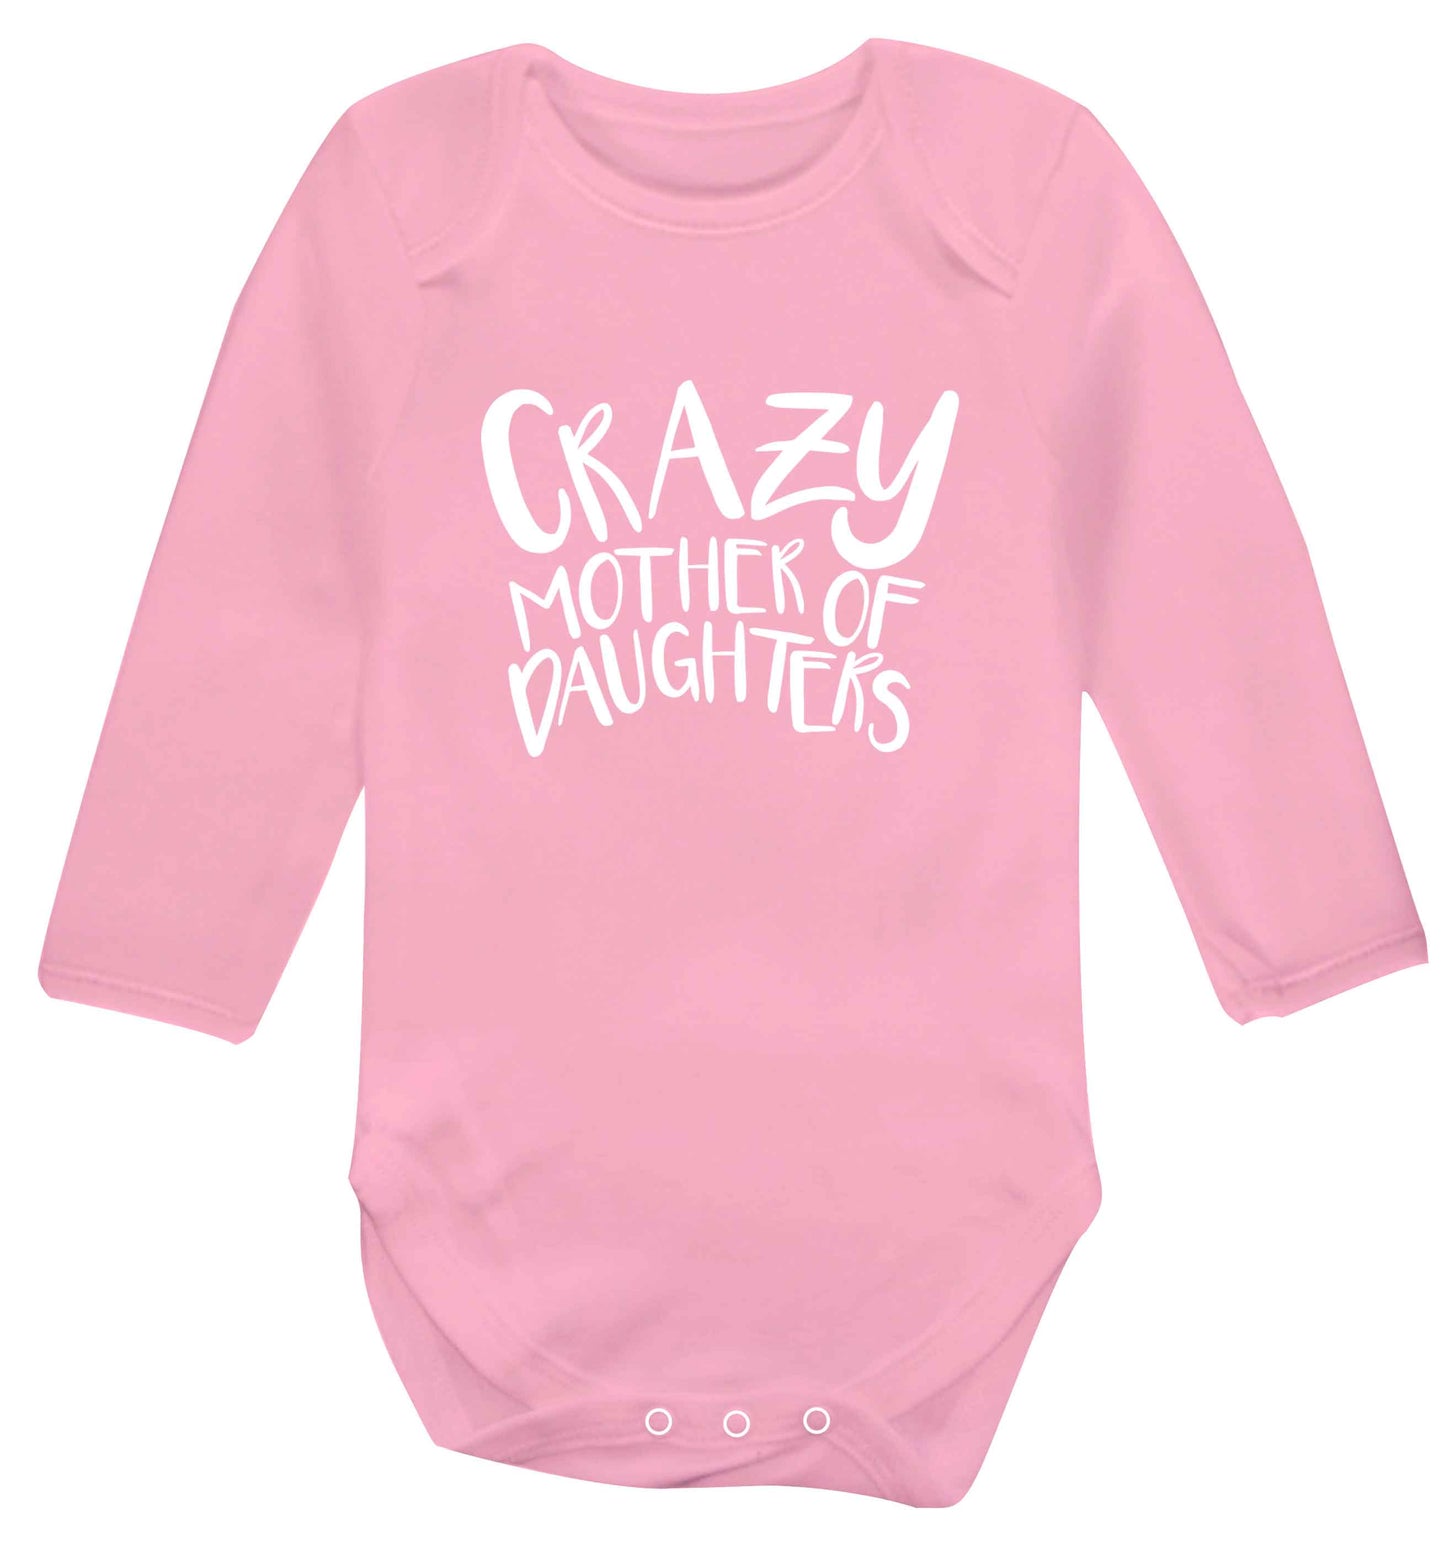 Crazy mother of daughters baby vest long sleeved pale pink 6-12 months